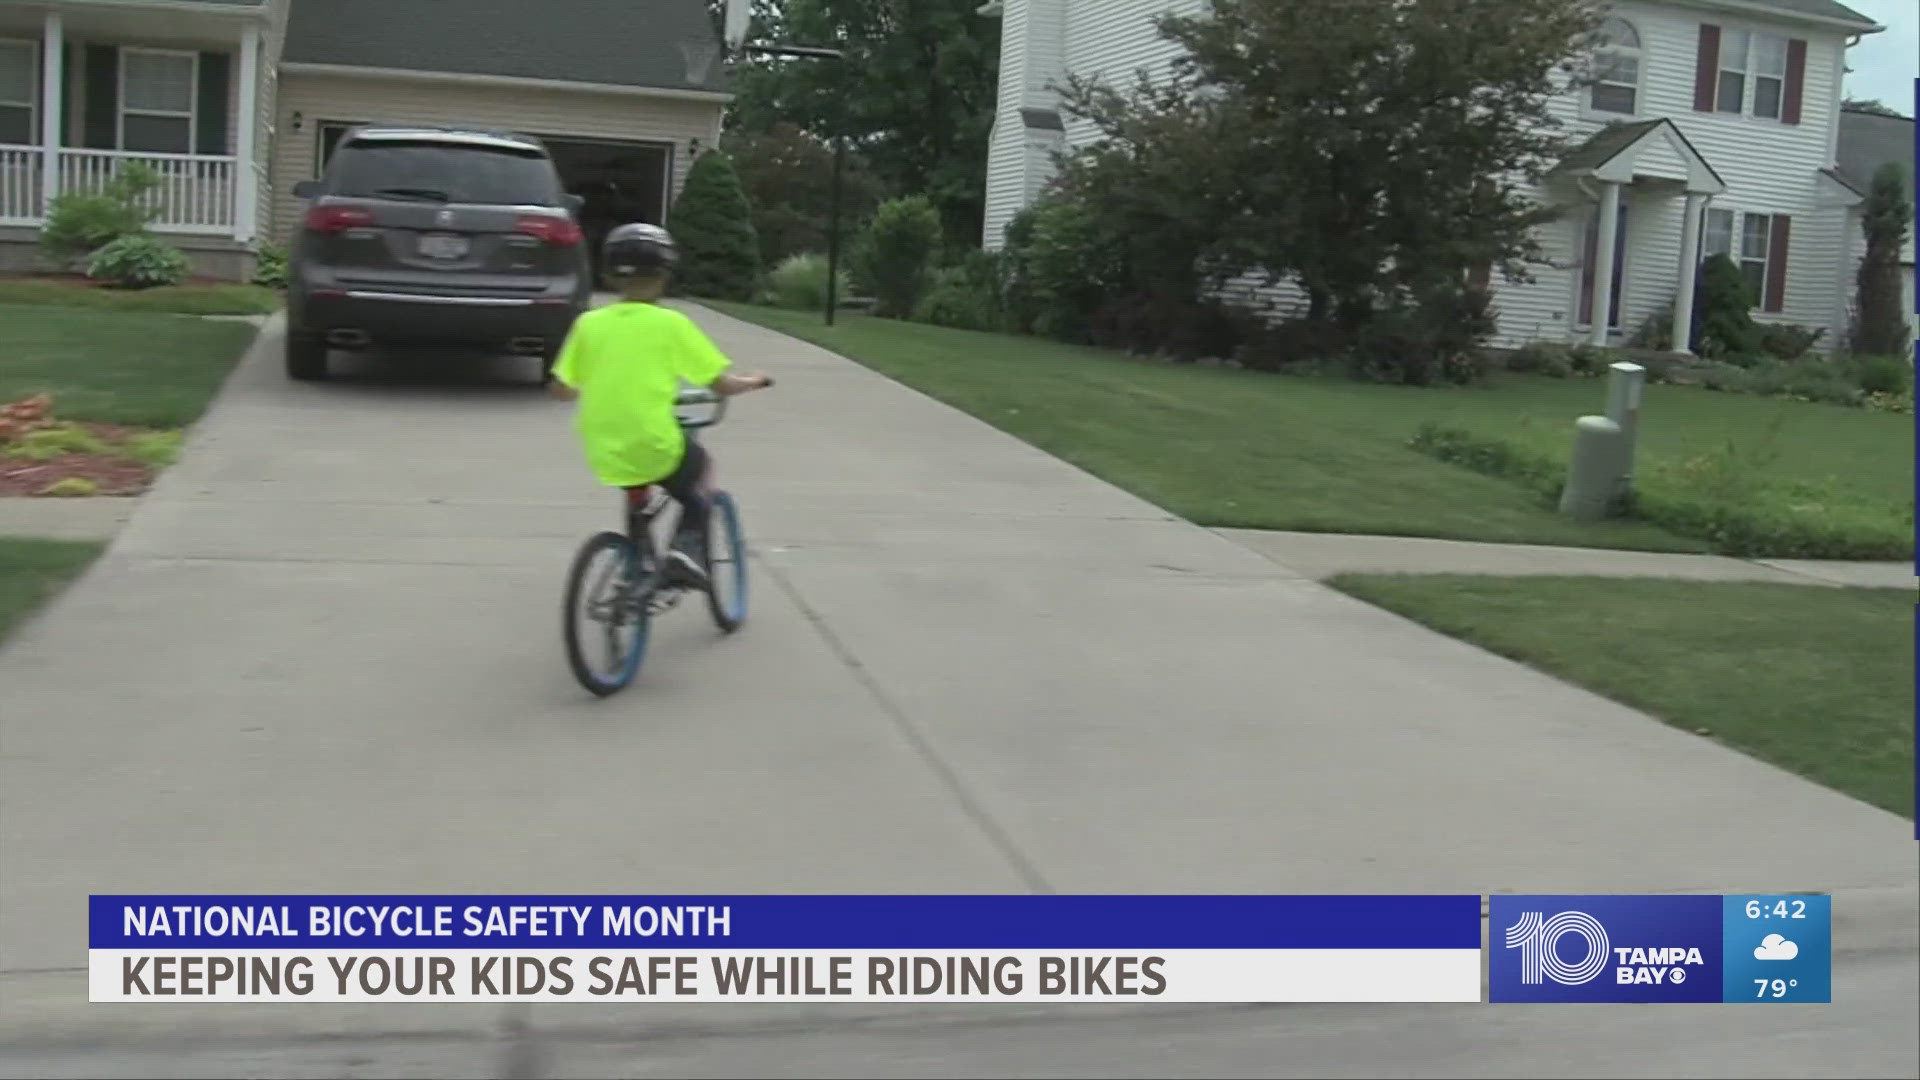 Kids should wear helmets that fit and so should parents, to reinforce the message.